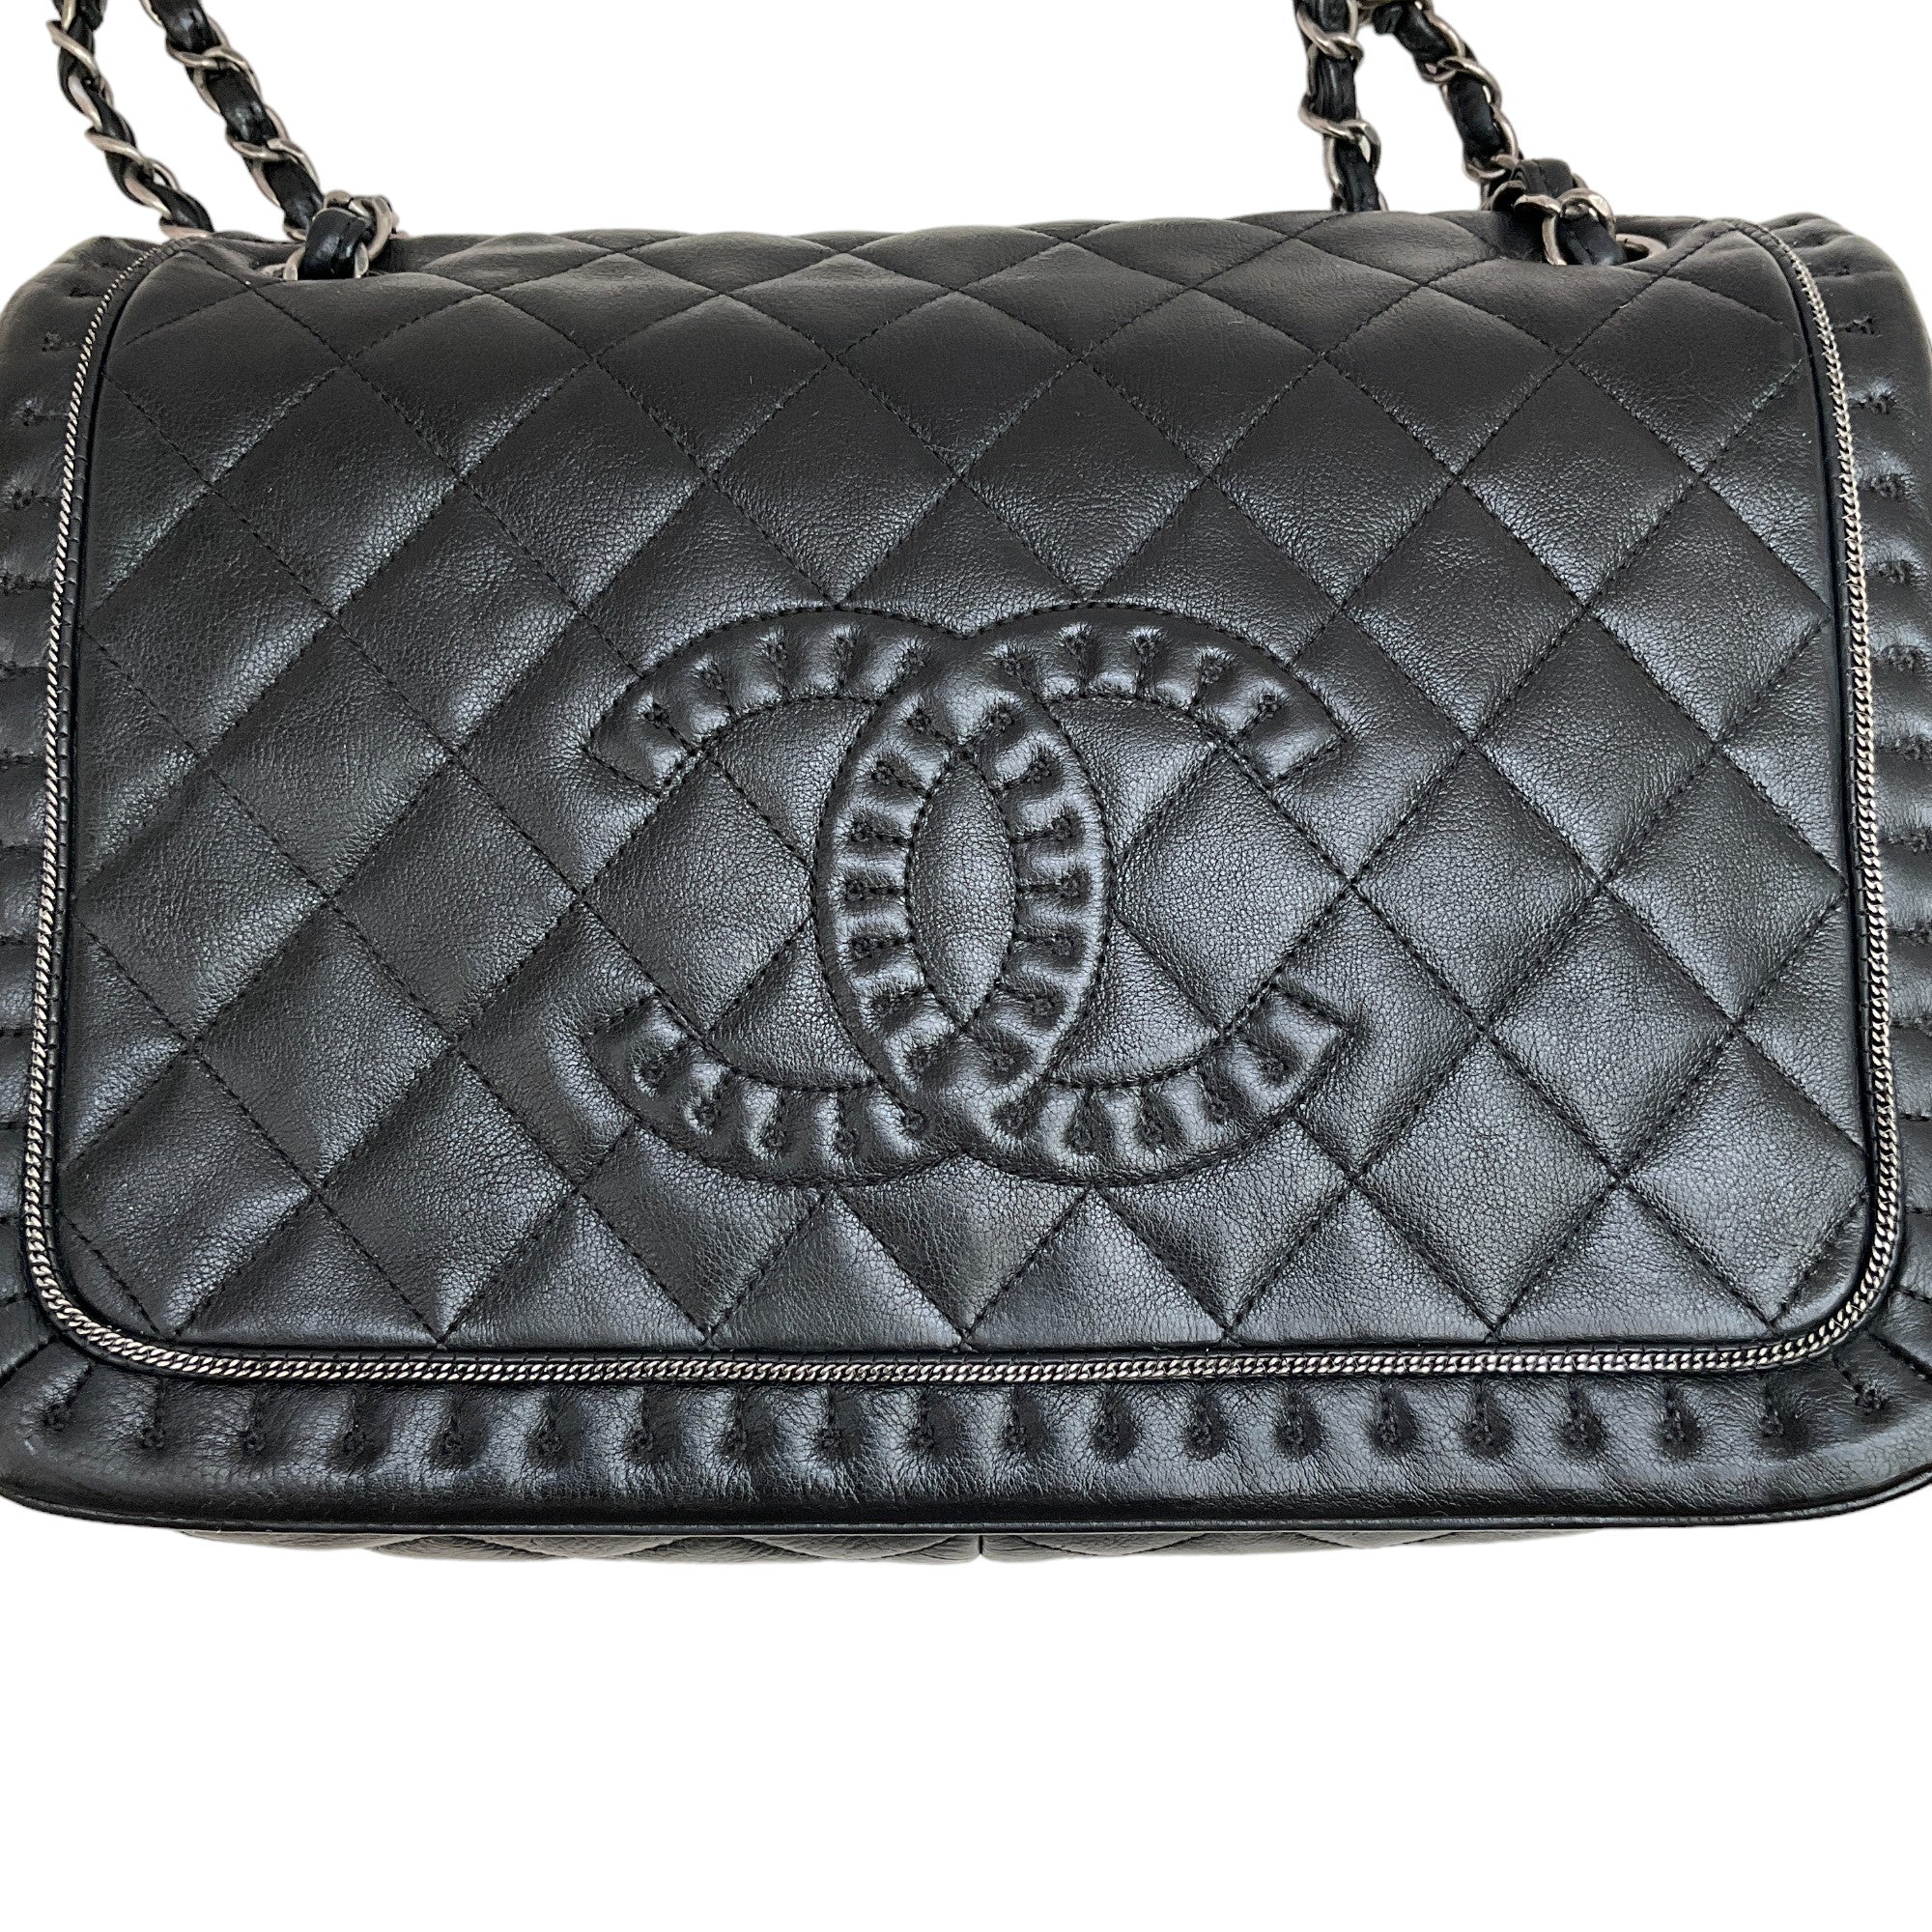 Chanel 2011 Black Leather Istanbul Flap Bag